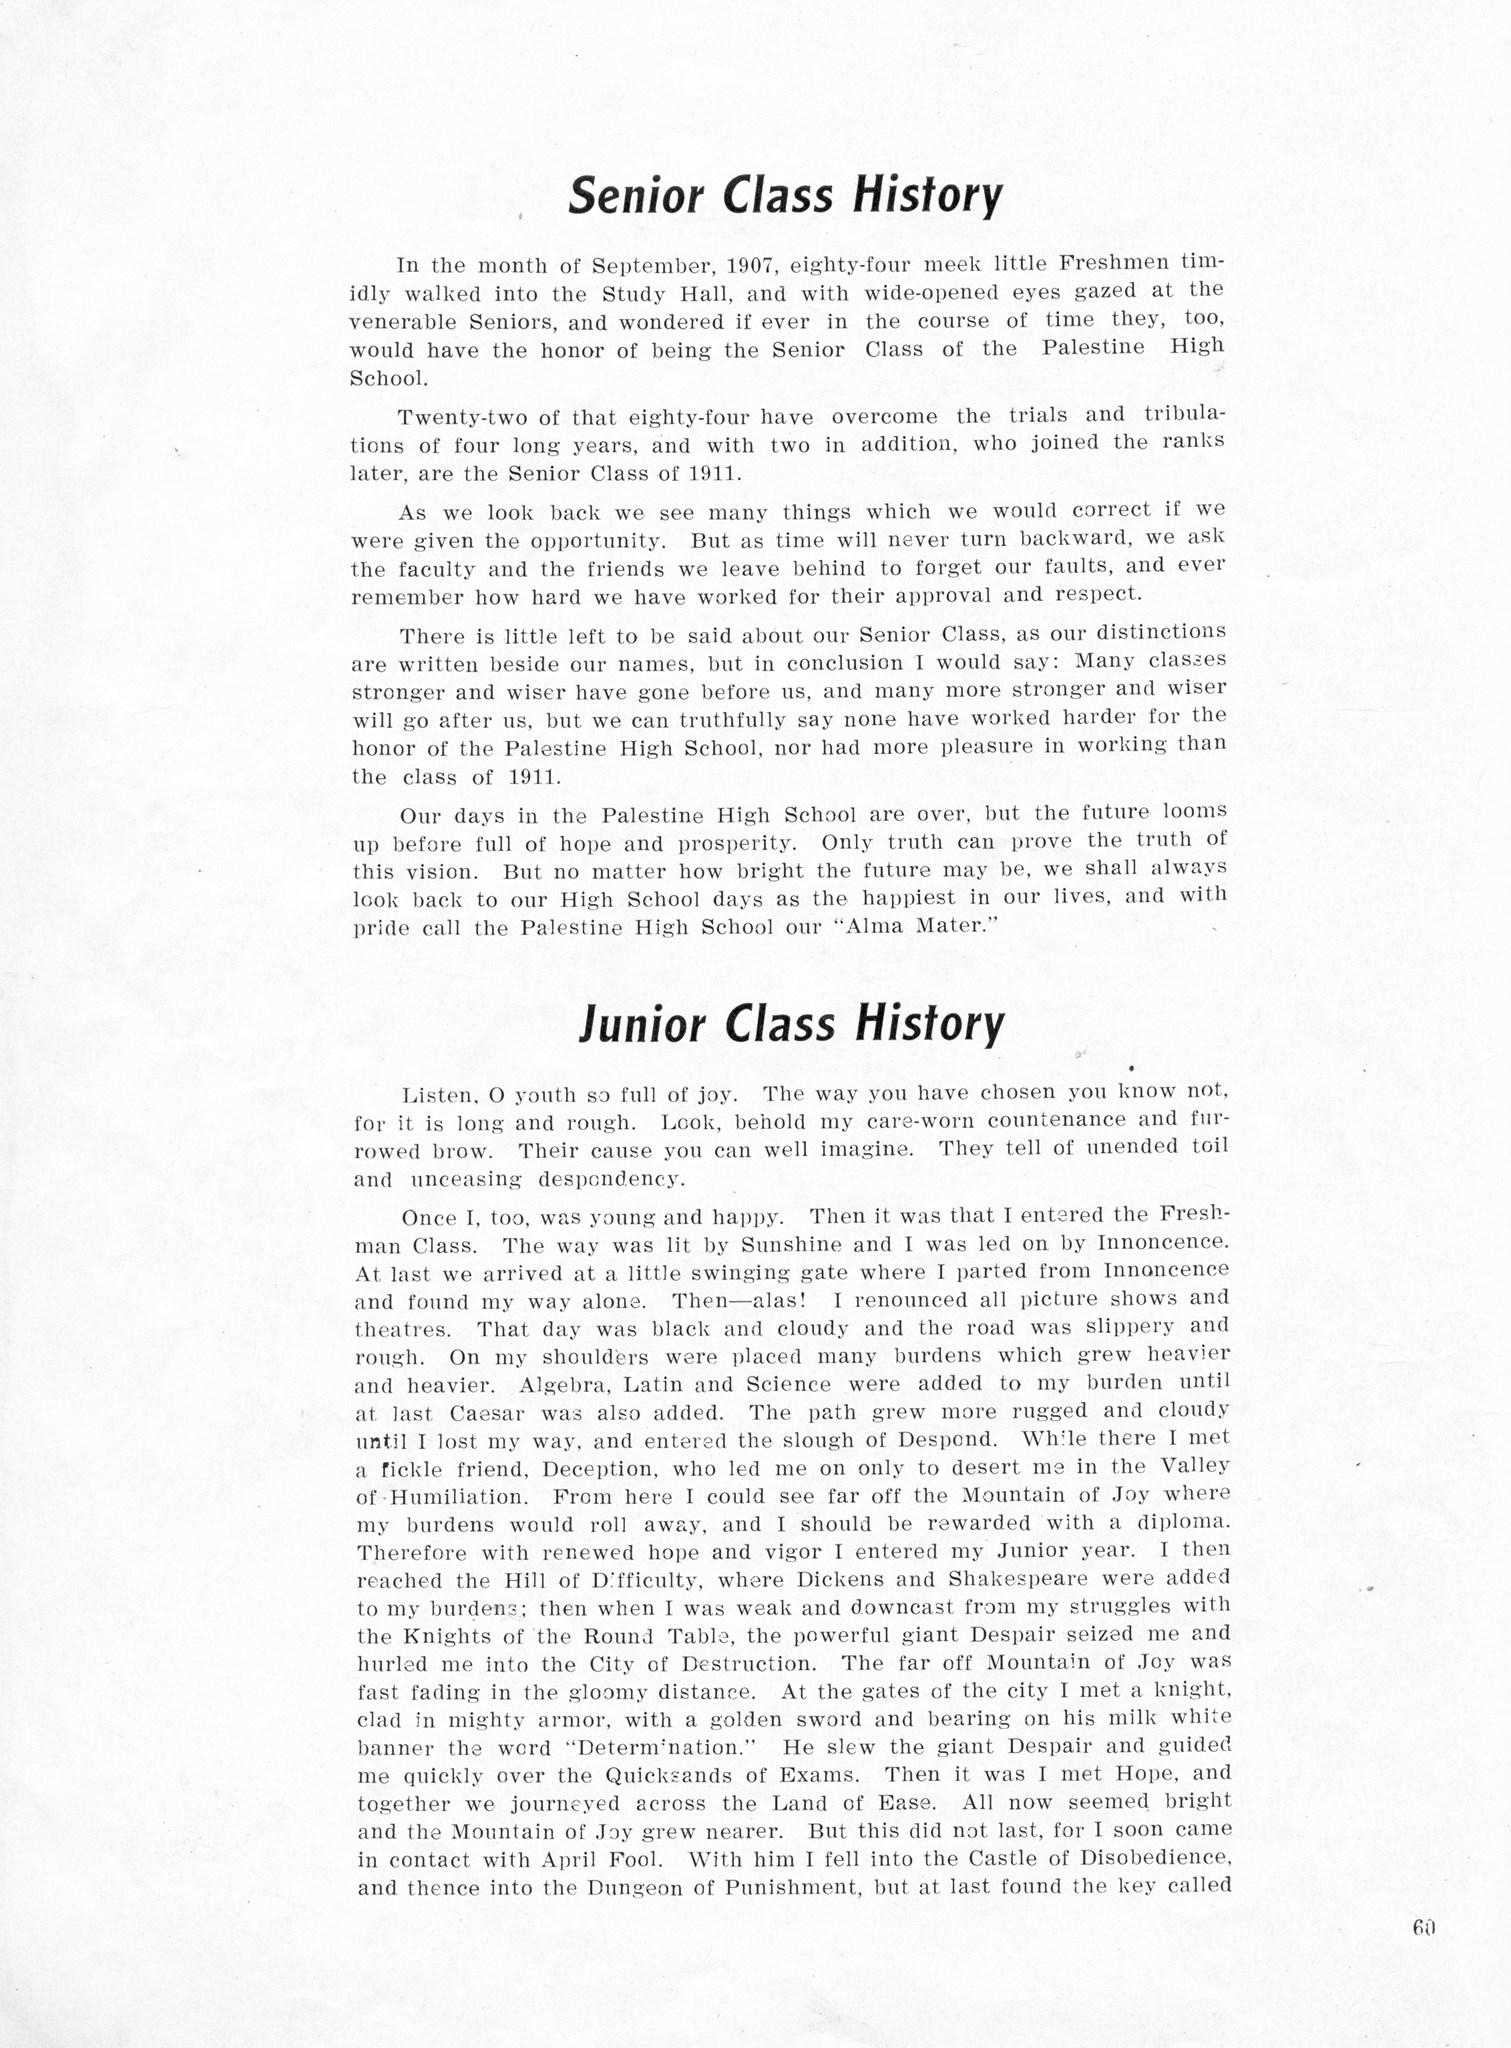 ../../../Images/Large/1911/Arclight-1911-pg0060.jpg